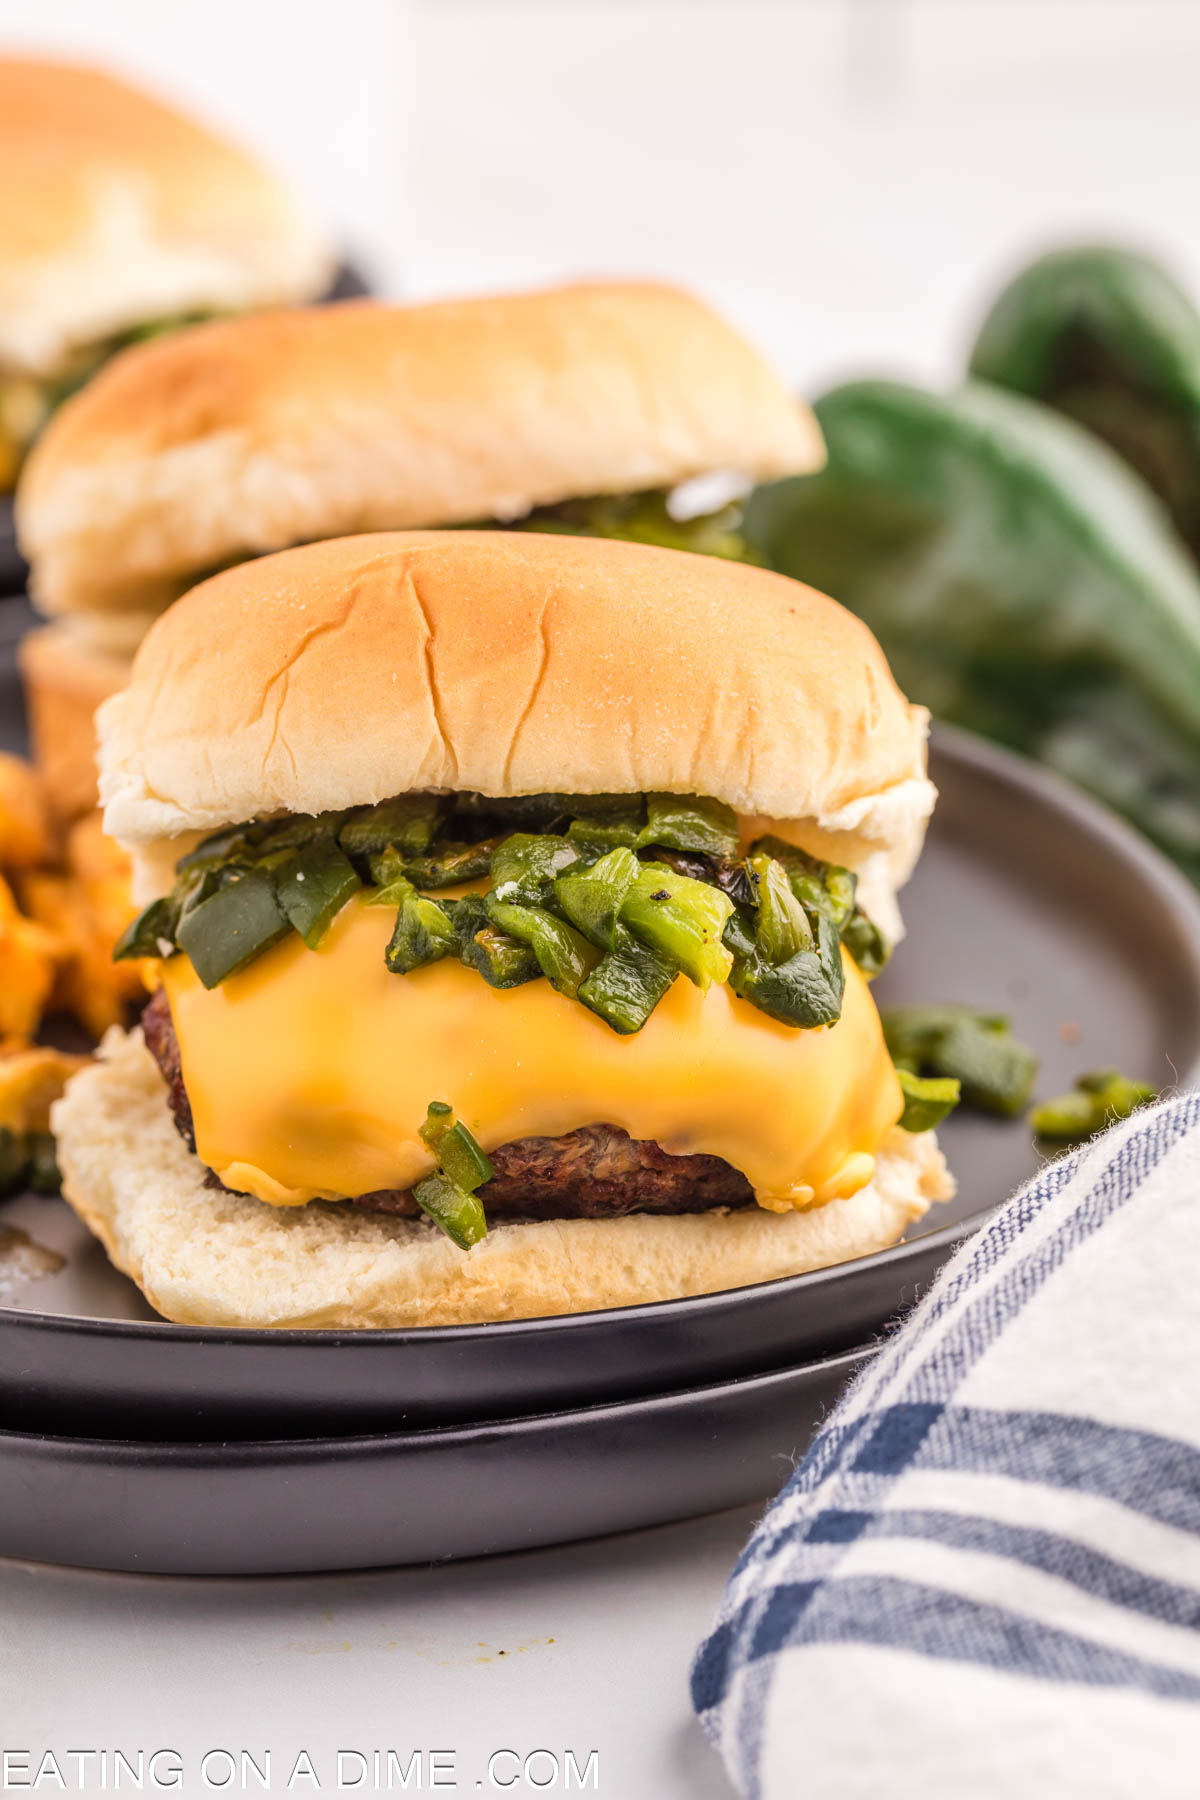 Green Chili Burger - Eating on a Dime